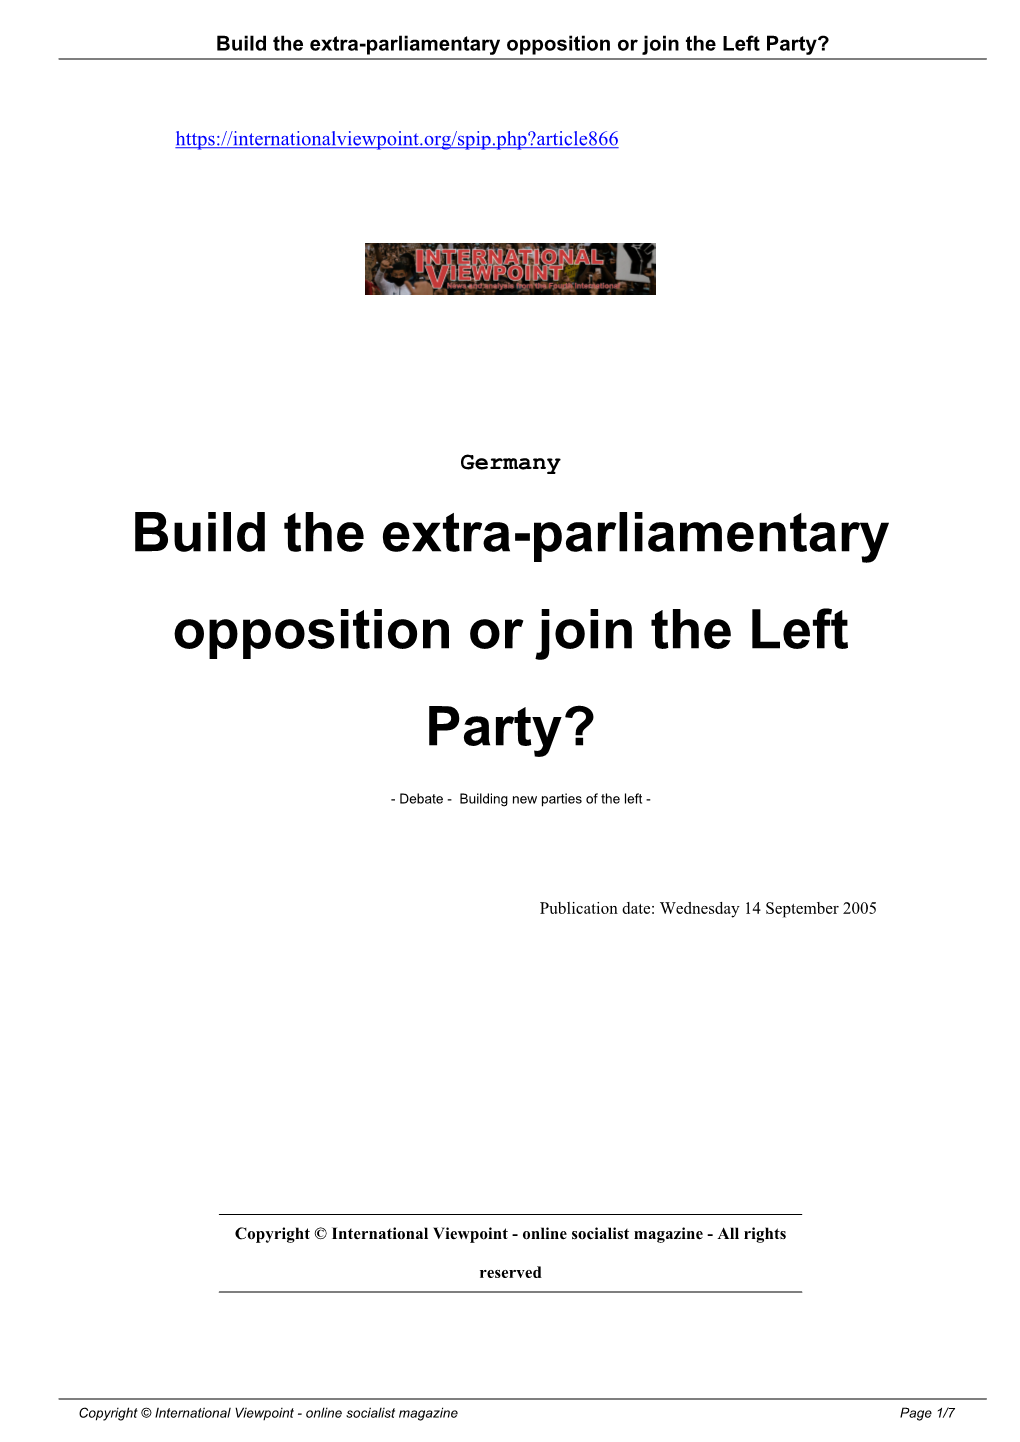 Build the Extra-Parliamentary Opposition Or Join the Left Party?